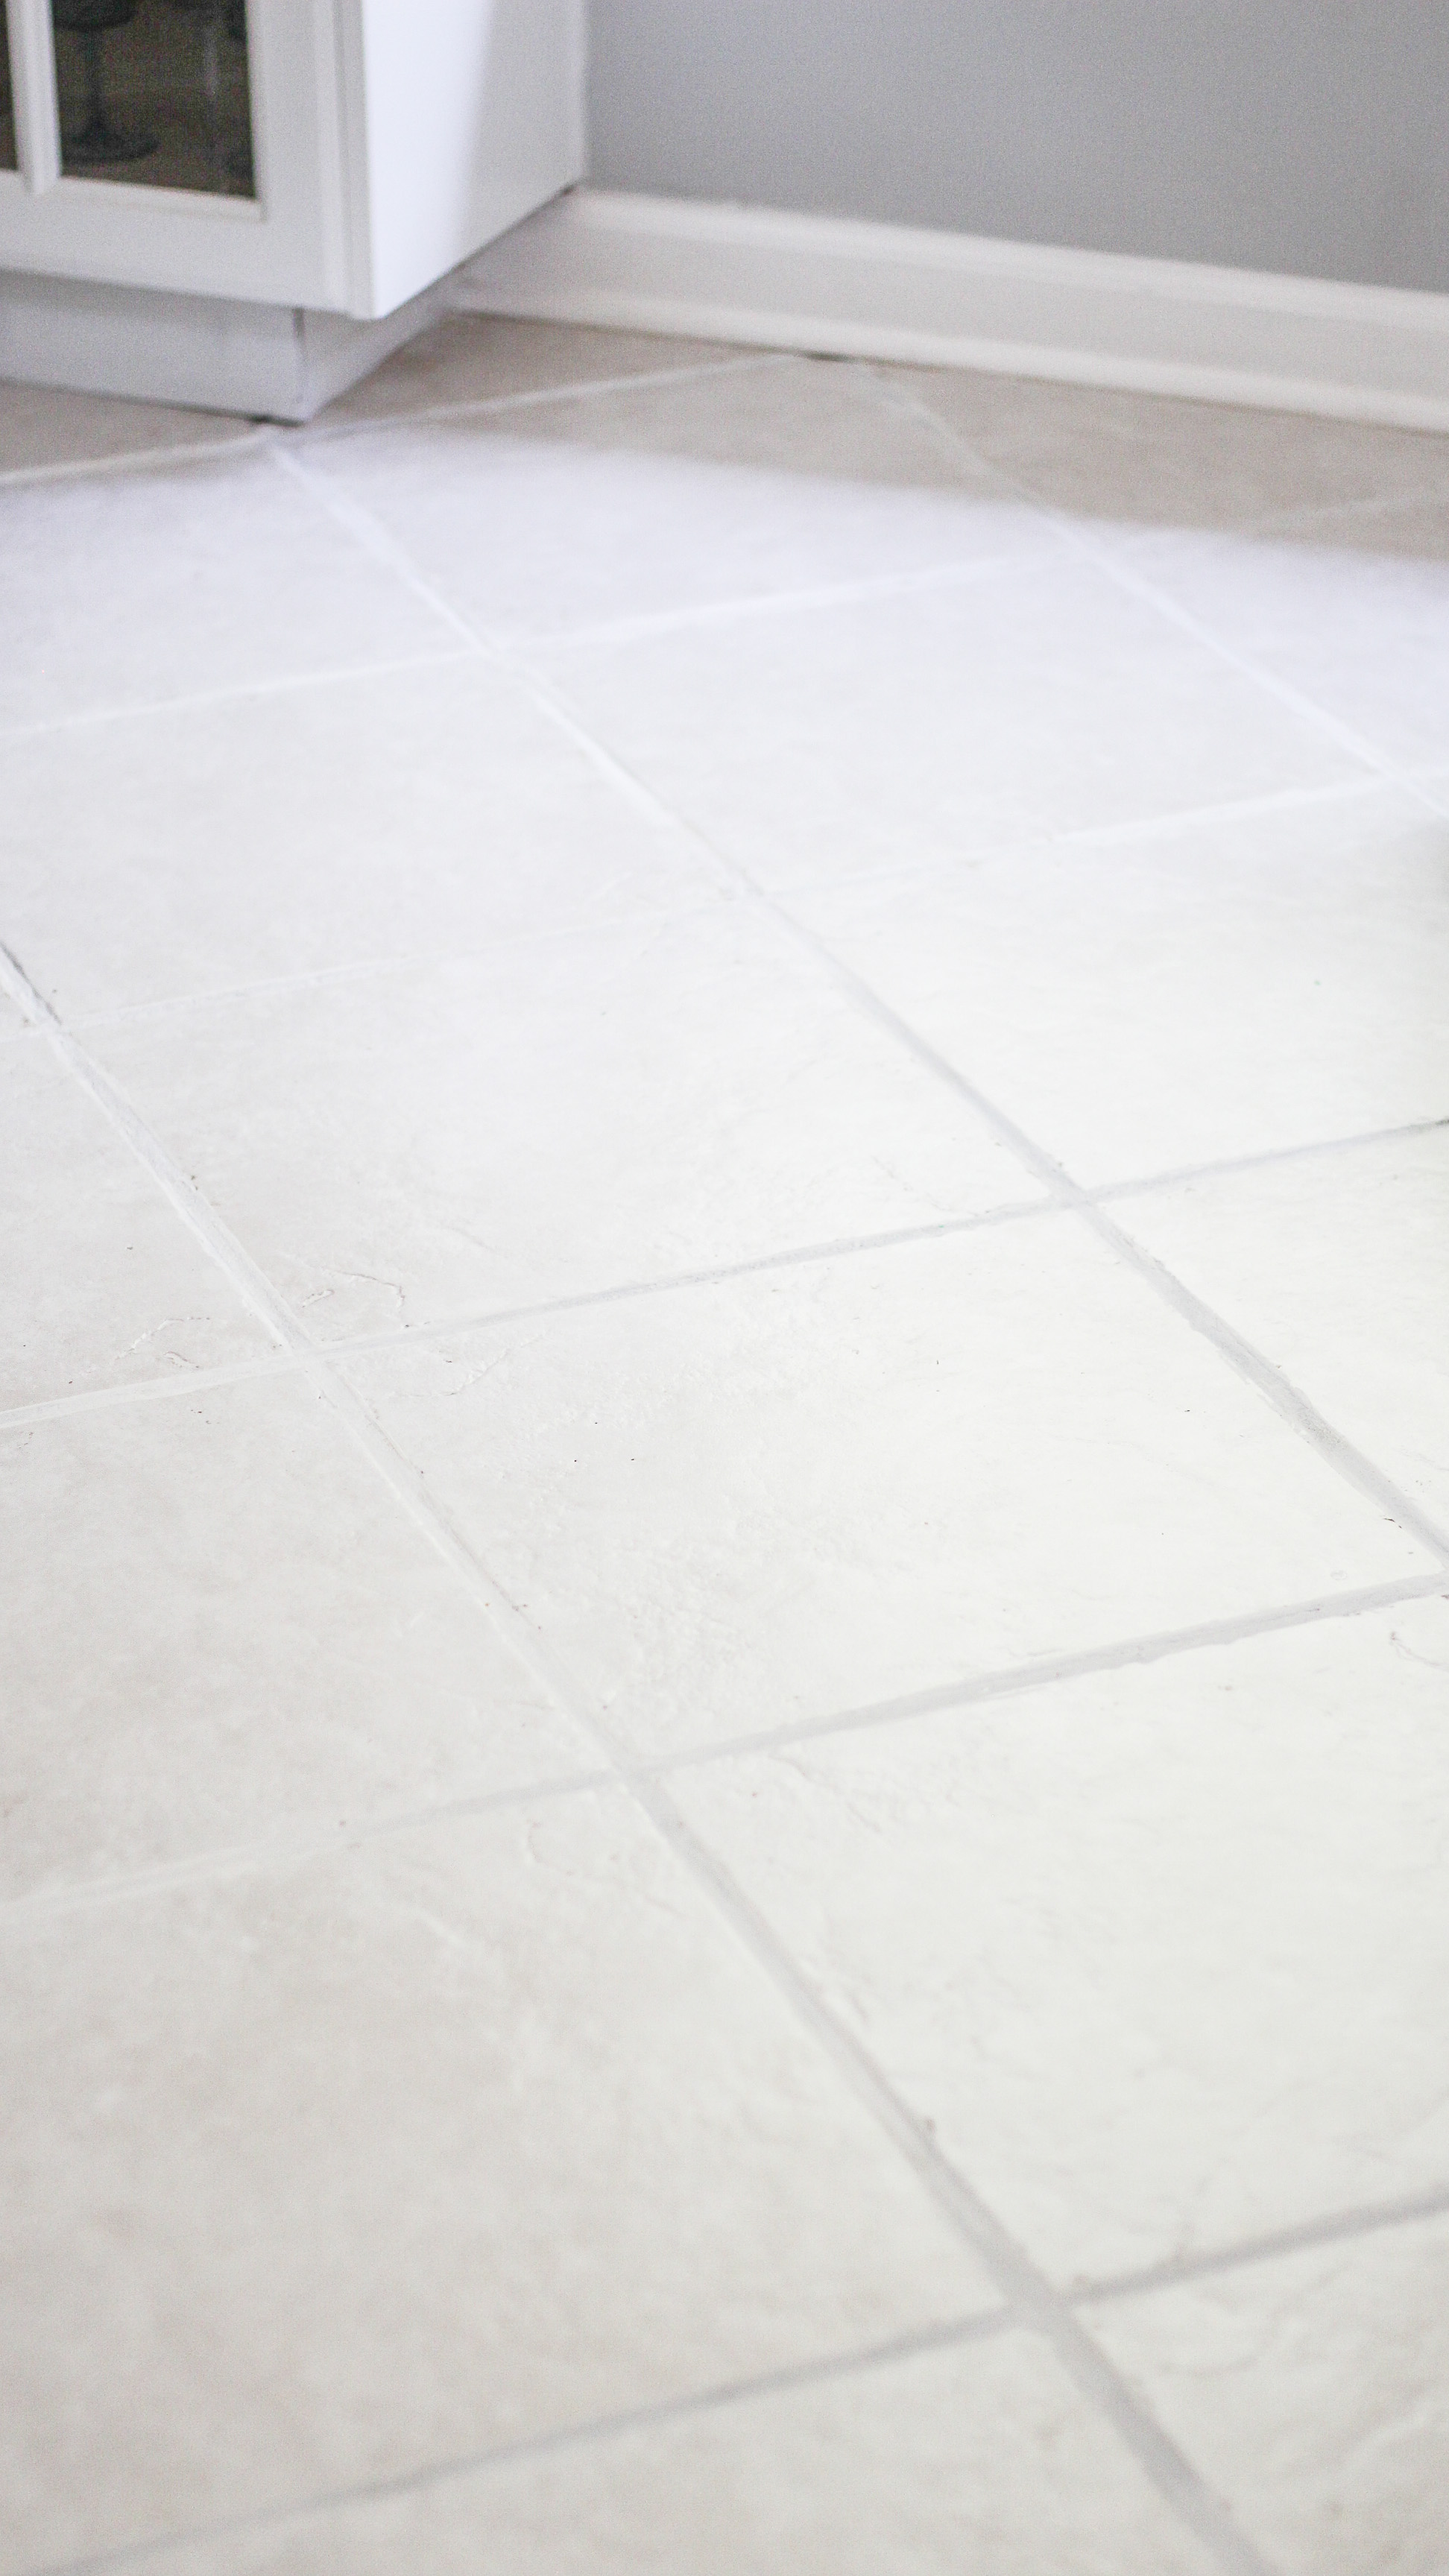 Neglected Tile Flooring, How To Clean Ceramic Tile Floors With Grout